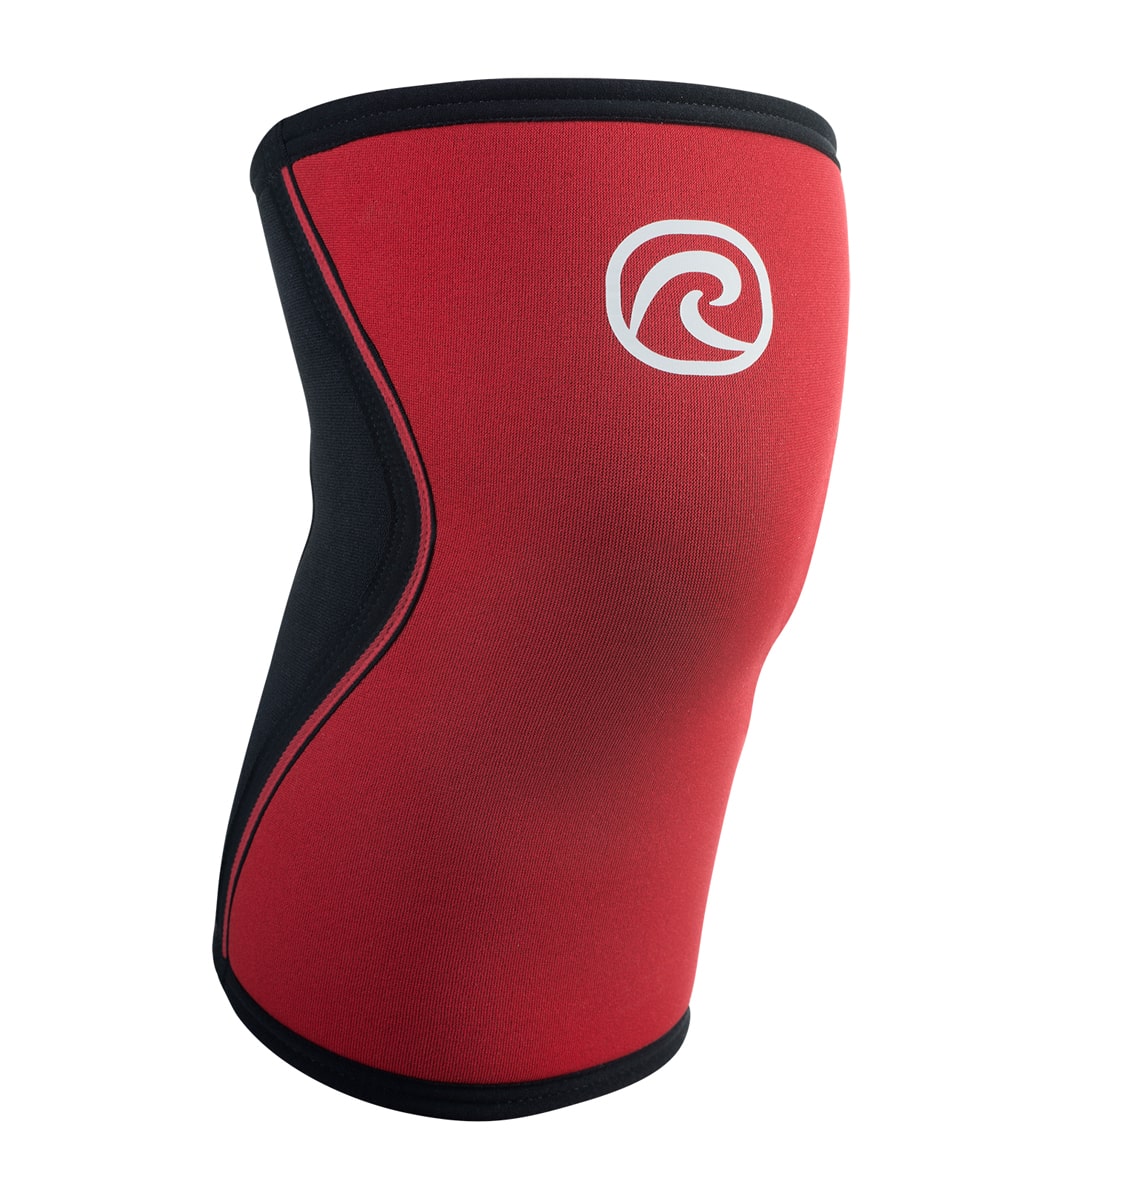 105304-01 - Rehband Rx Knee Sleeve - Red/Black - 5mm - Front